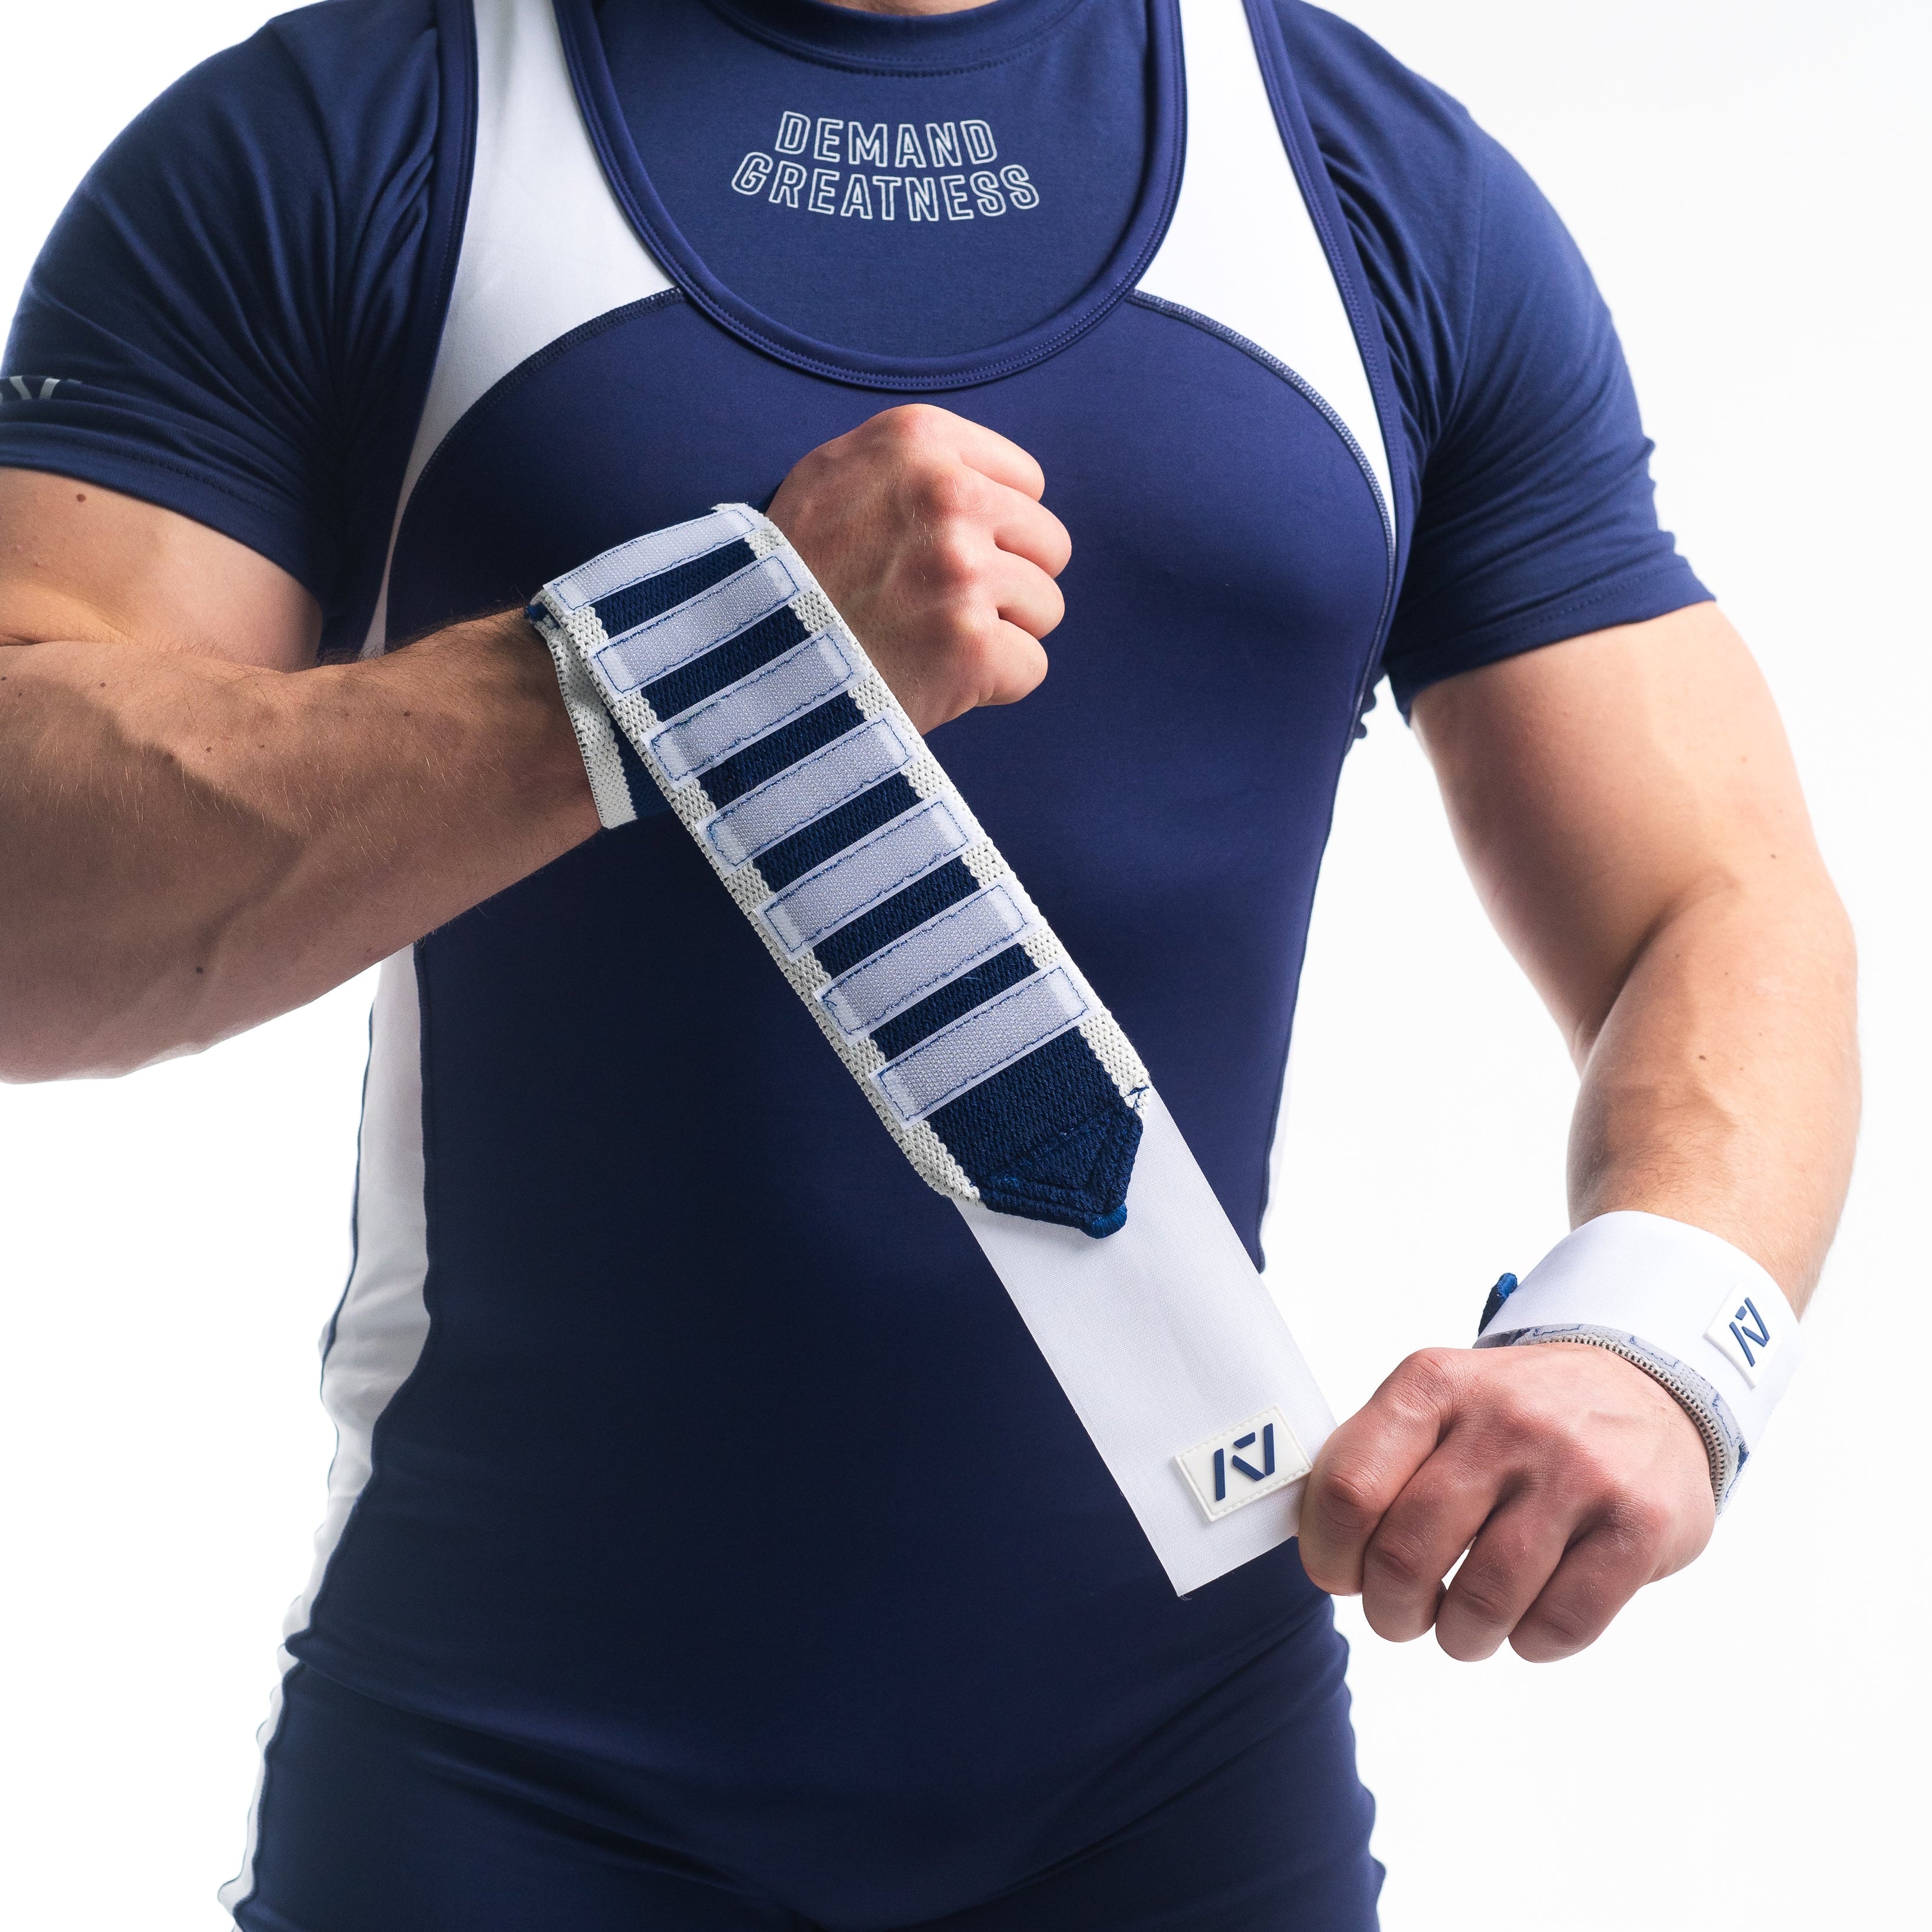 A7 IPF Approved Zebra Wraps feature strips of velcro on the wraps, allowing Zebra Wraps to conform fully to your unique preference of tightness. We offer Zebra wrist wraps in 3 lengths and 4 stiffnesses (Flexi, Mids, Stiff, and Rigor Mortis). The IPF Approved Kit includes Powerlifting Singlet, A7 Meet Shirt, A7 Zebra Wrist Wraps, A7 Deadlift Socks, Hourglass Knee Sleeves (Stiff Knee Sleeves and Rigor Mortis Knee Sleeves). All A7 Powerlifting Equipment shipping to UK, Norway, Switzerland and Iceland. 